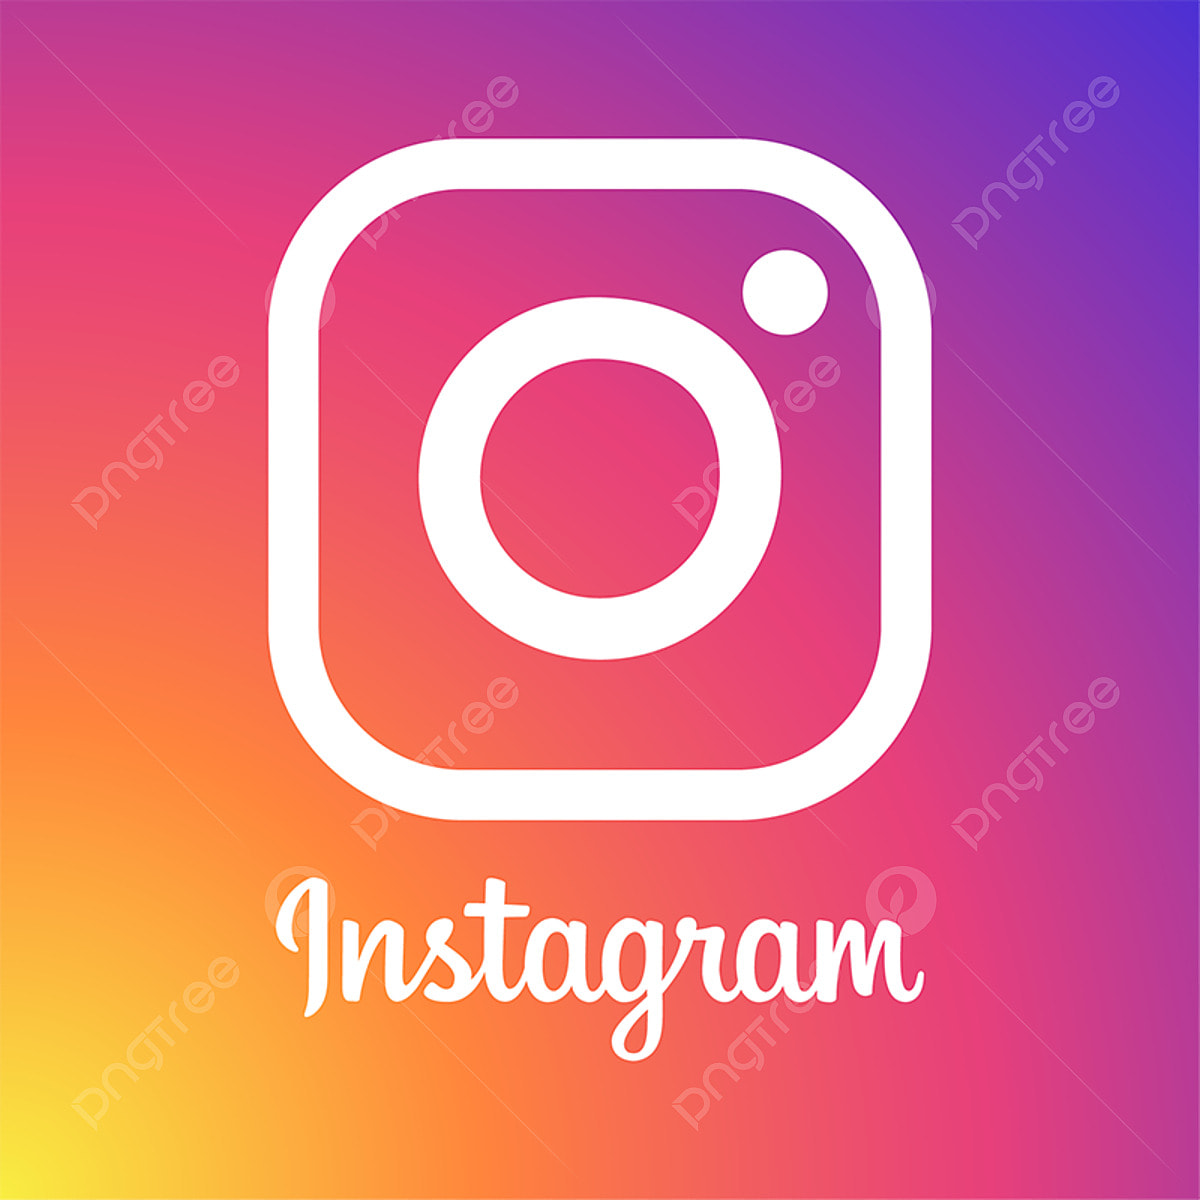 pngtree instagram logo icon png image_3588833